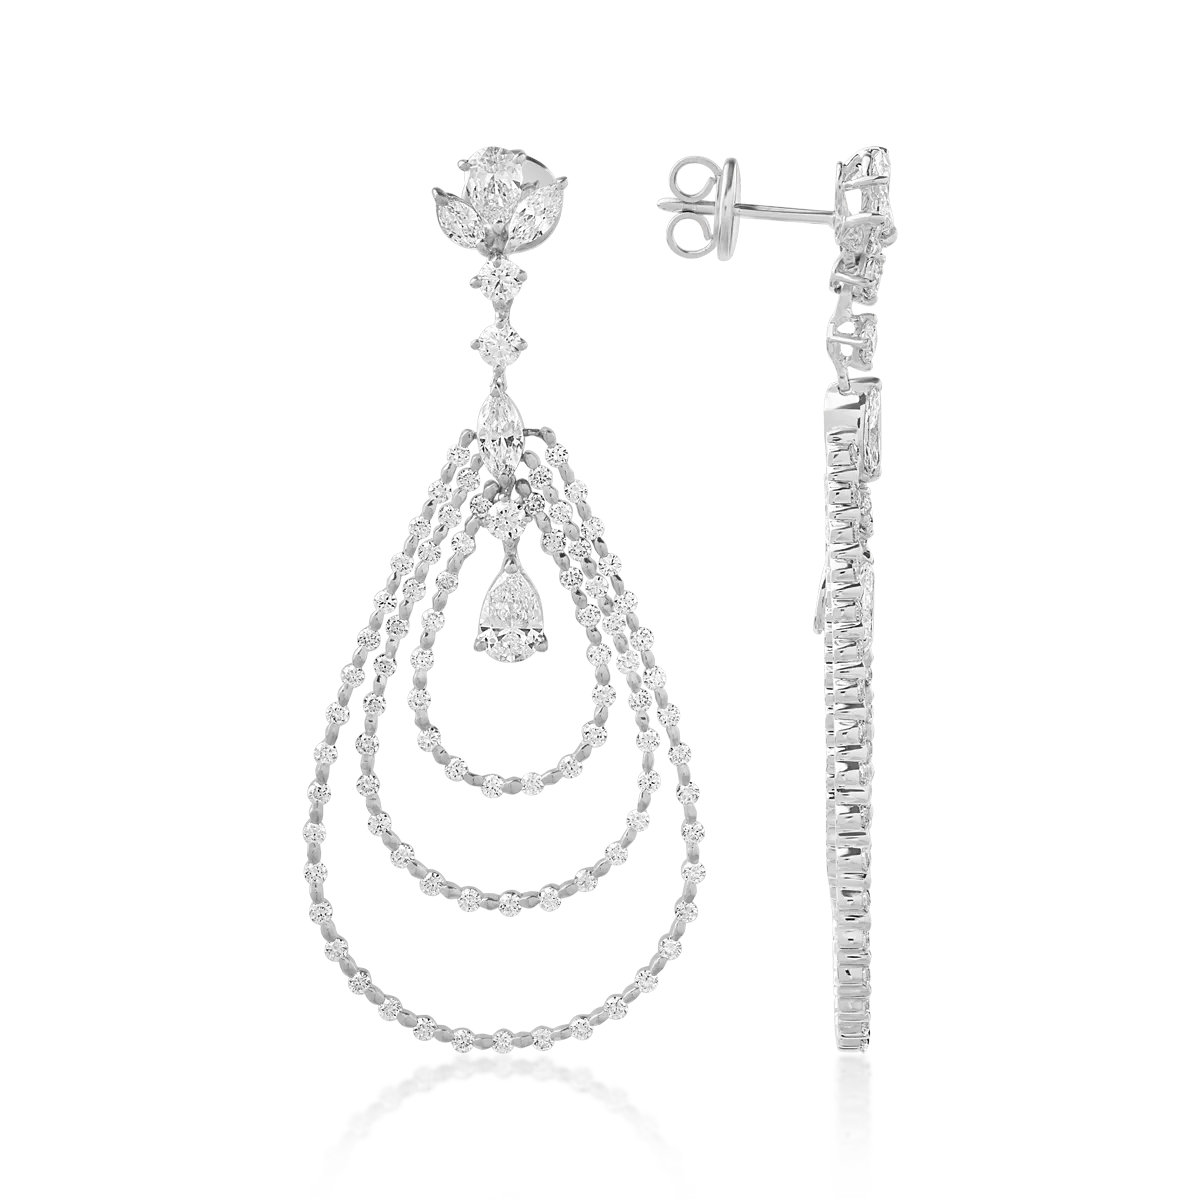 18K white gold earrings with 4.56ct diamonds